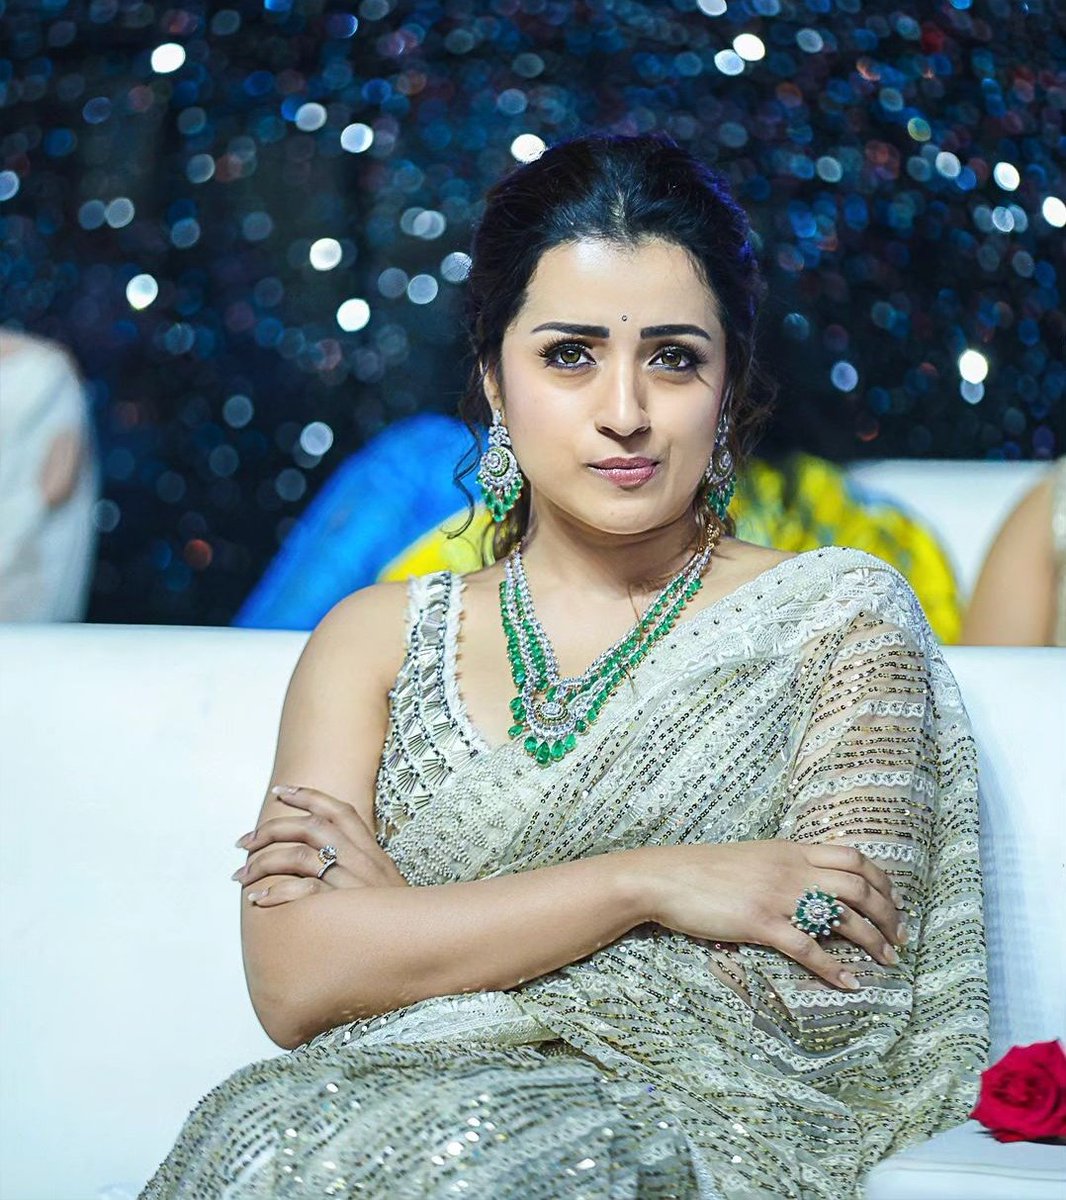 Traditional Beauty #SouthQueen #TrishaKrishnan Ma'am Latest Candid Clicks from #GalattaNakshatraAwards2023 😍

#SouthQueenTrisha #Trisha #Galatta